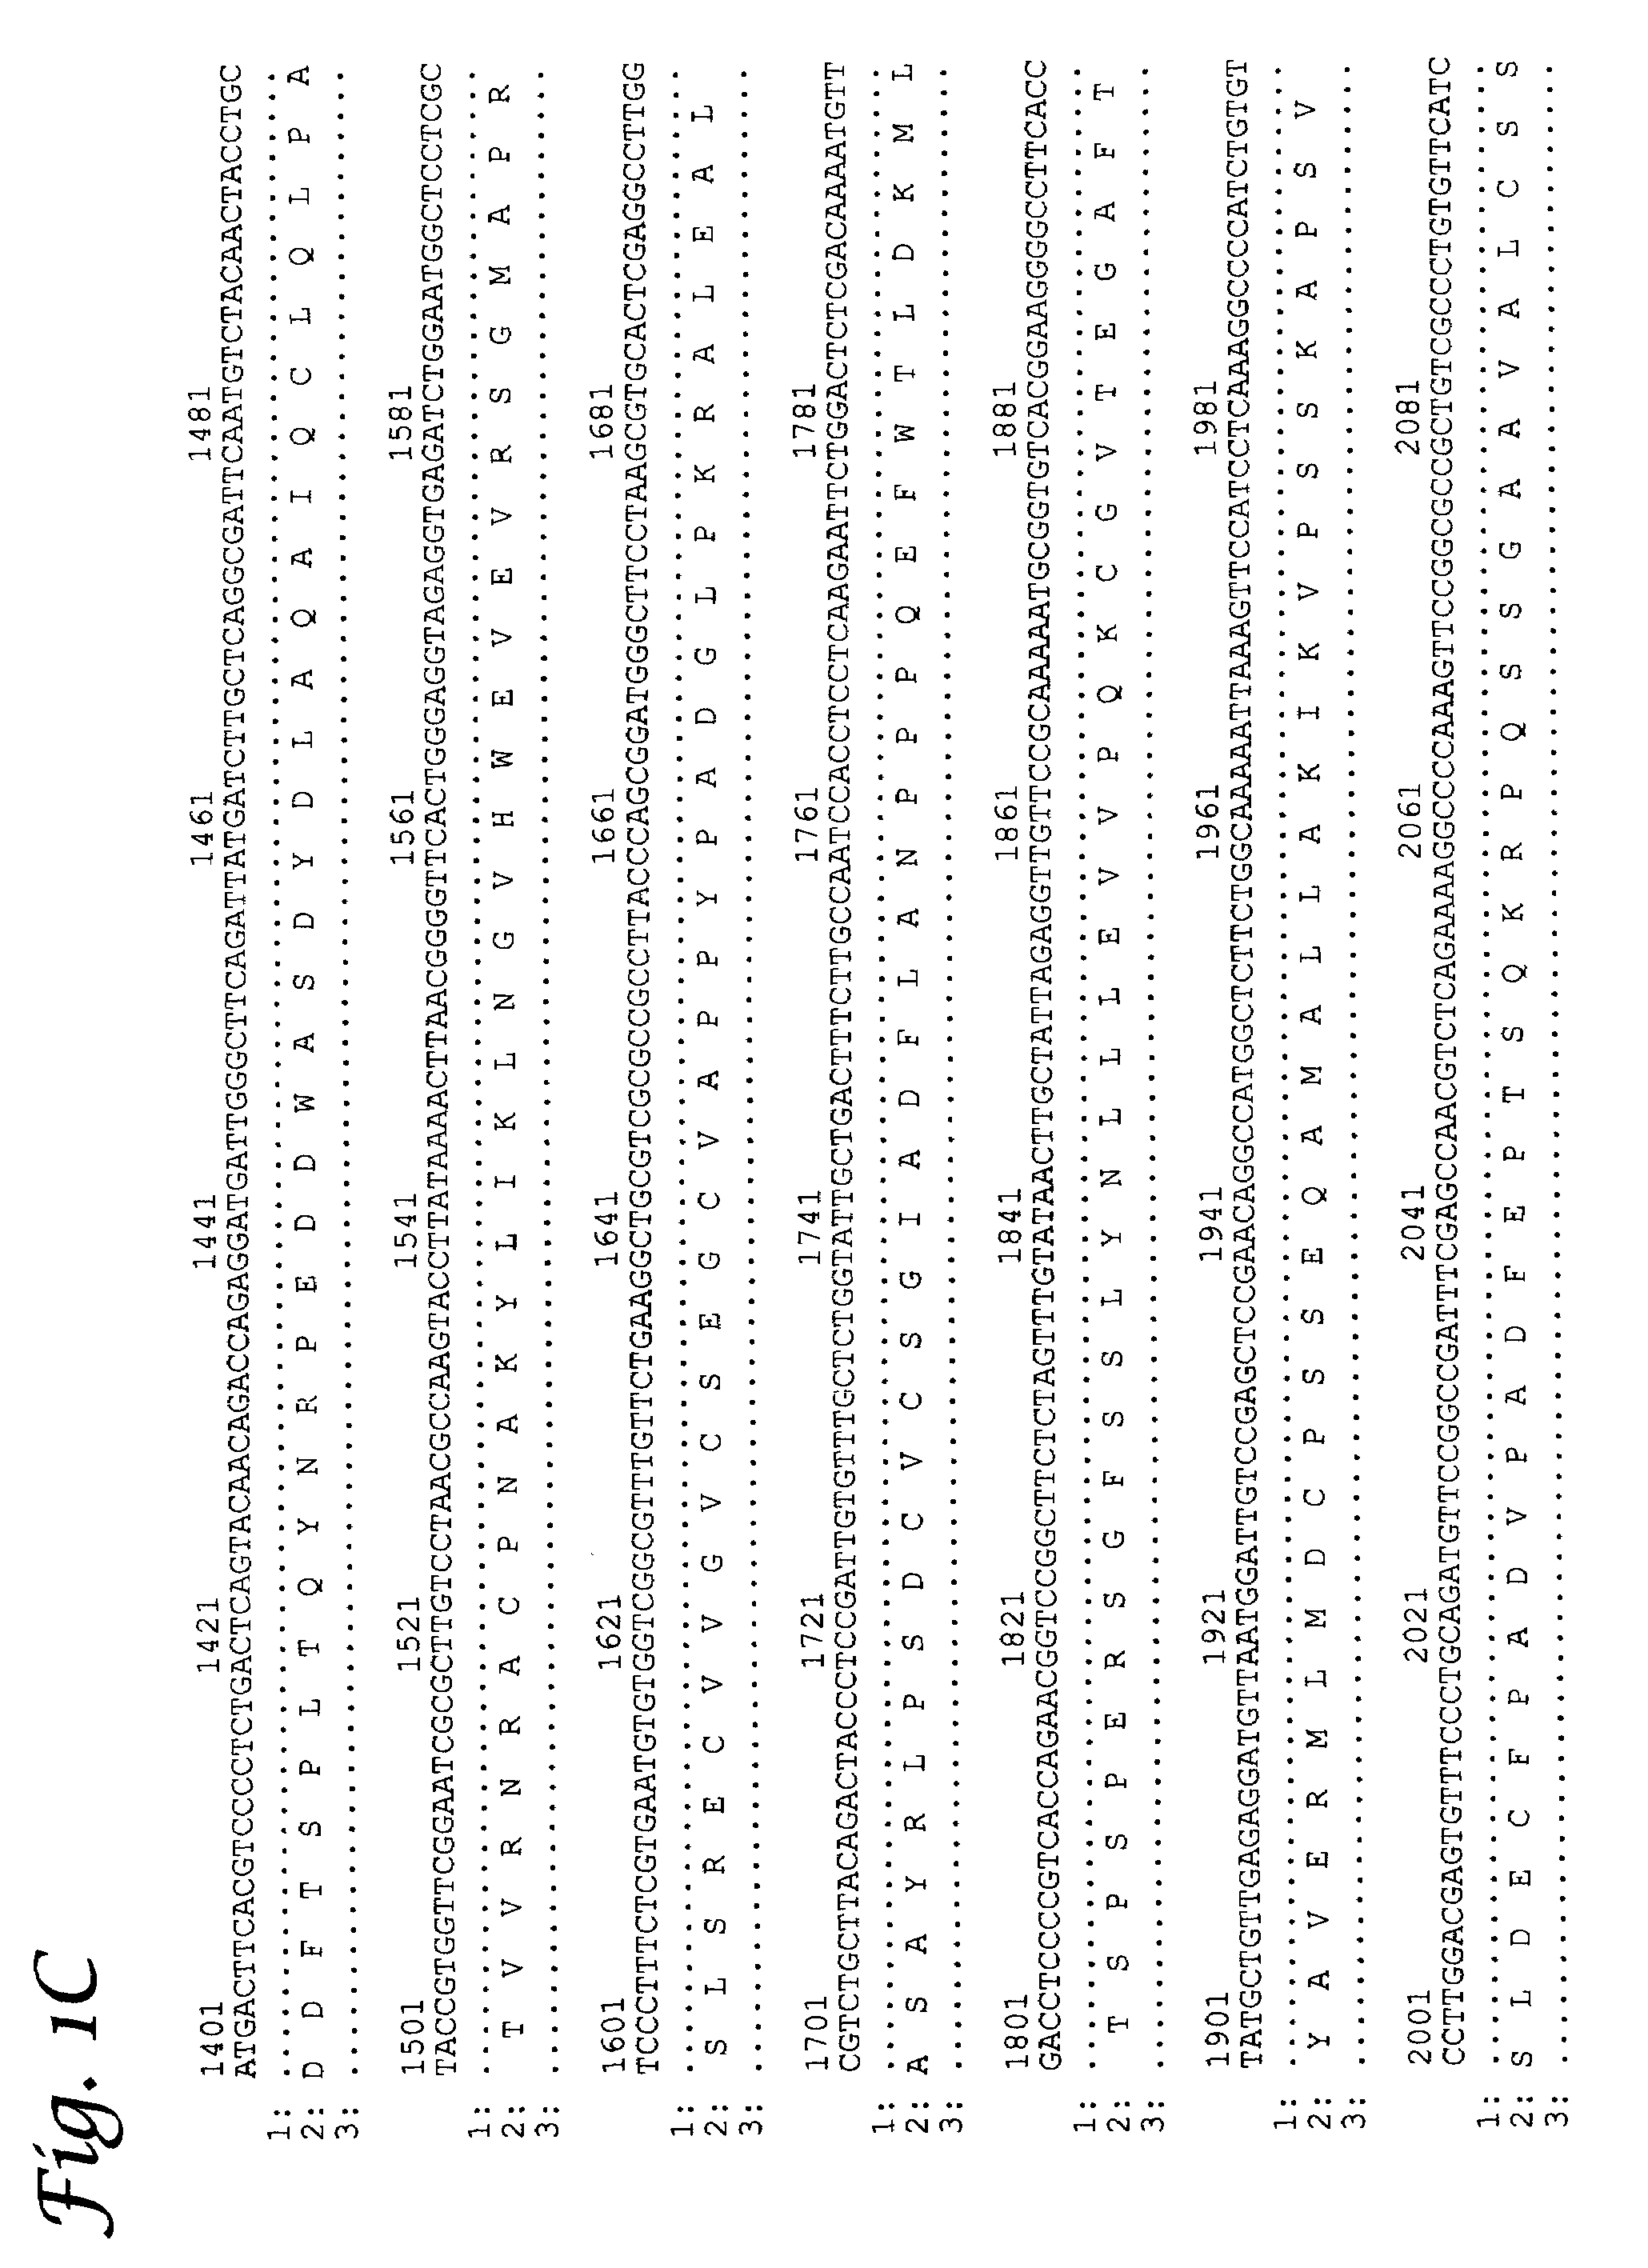 Porcine reproductive and respiratory syndrome virus and methods of use